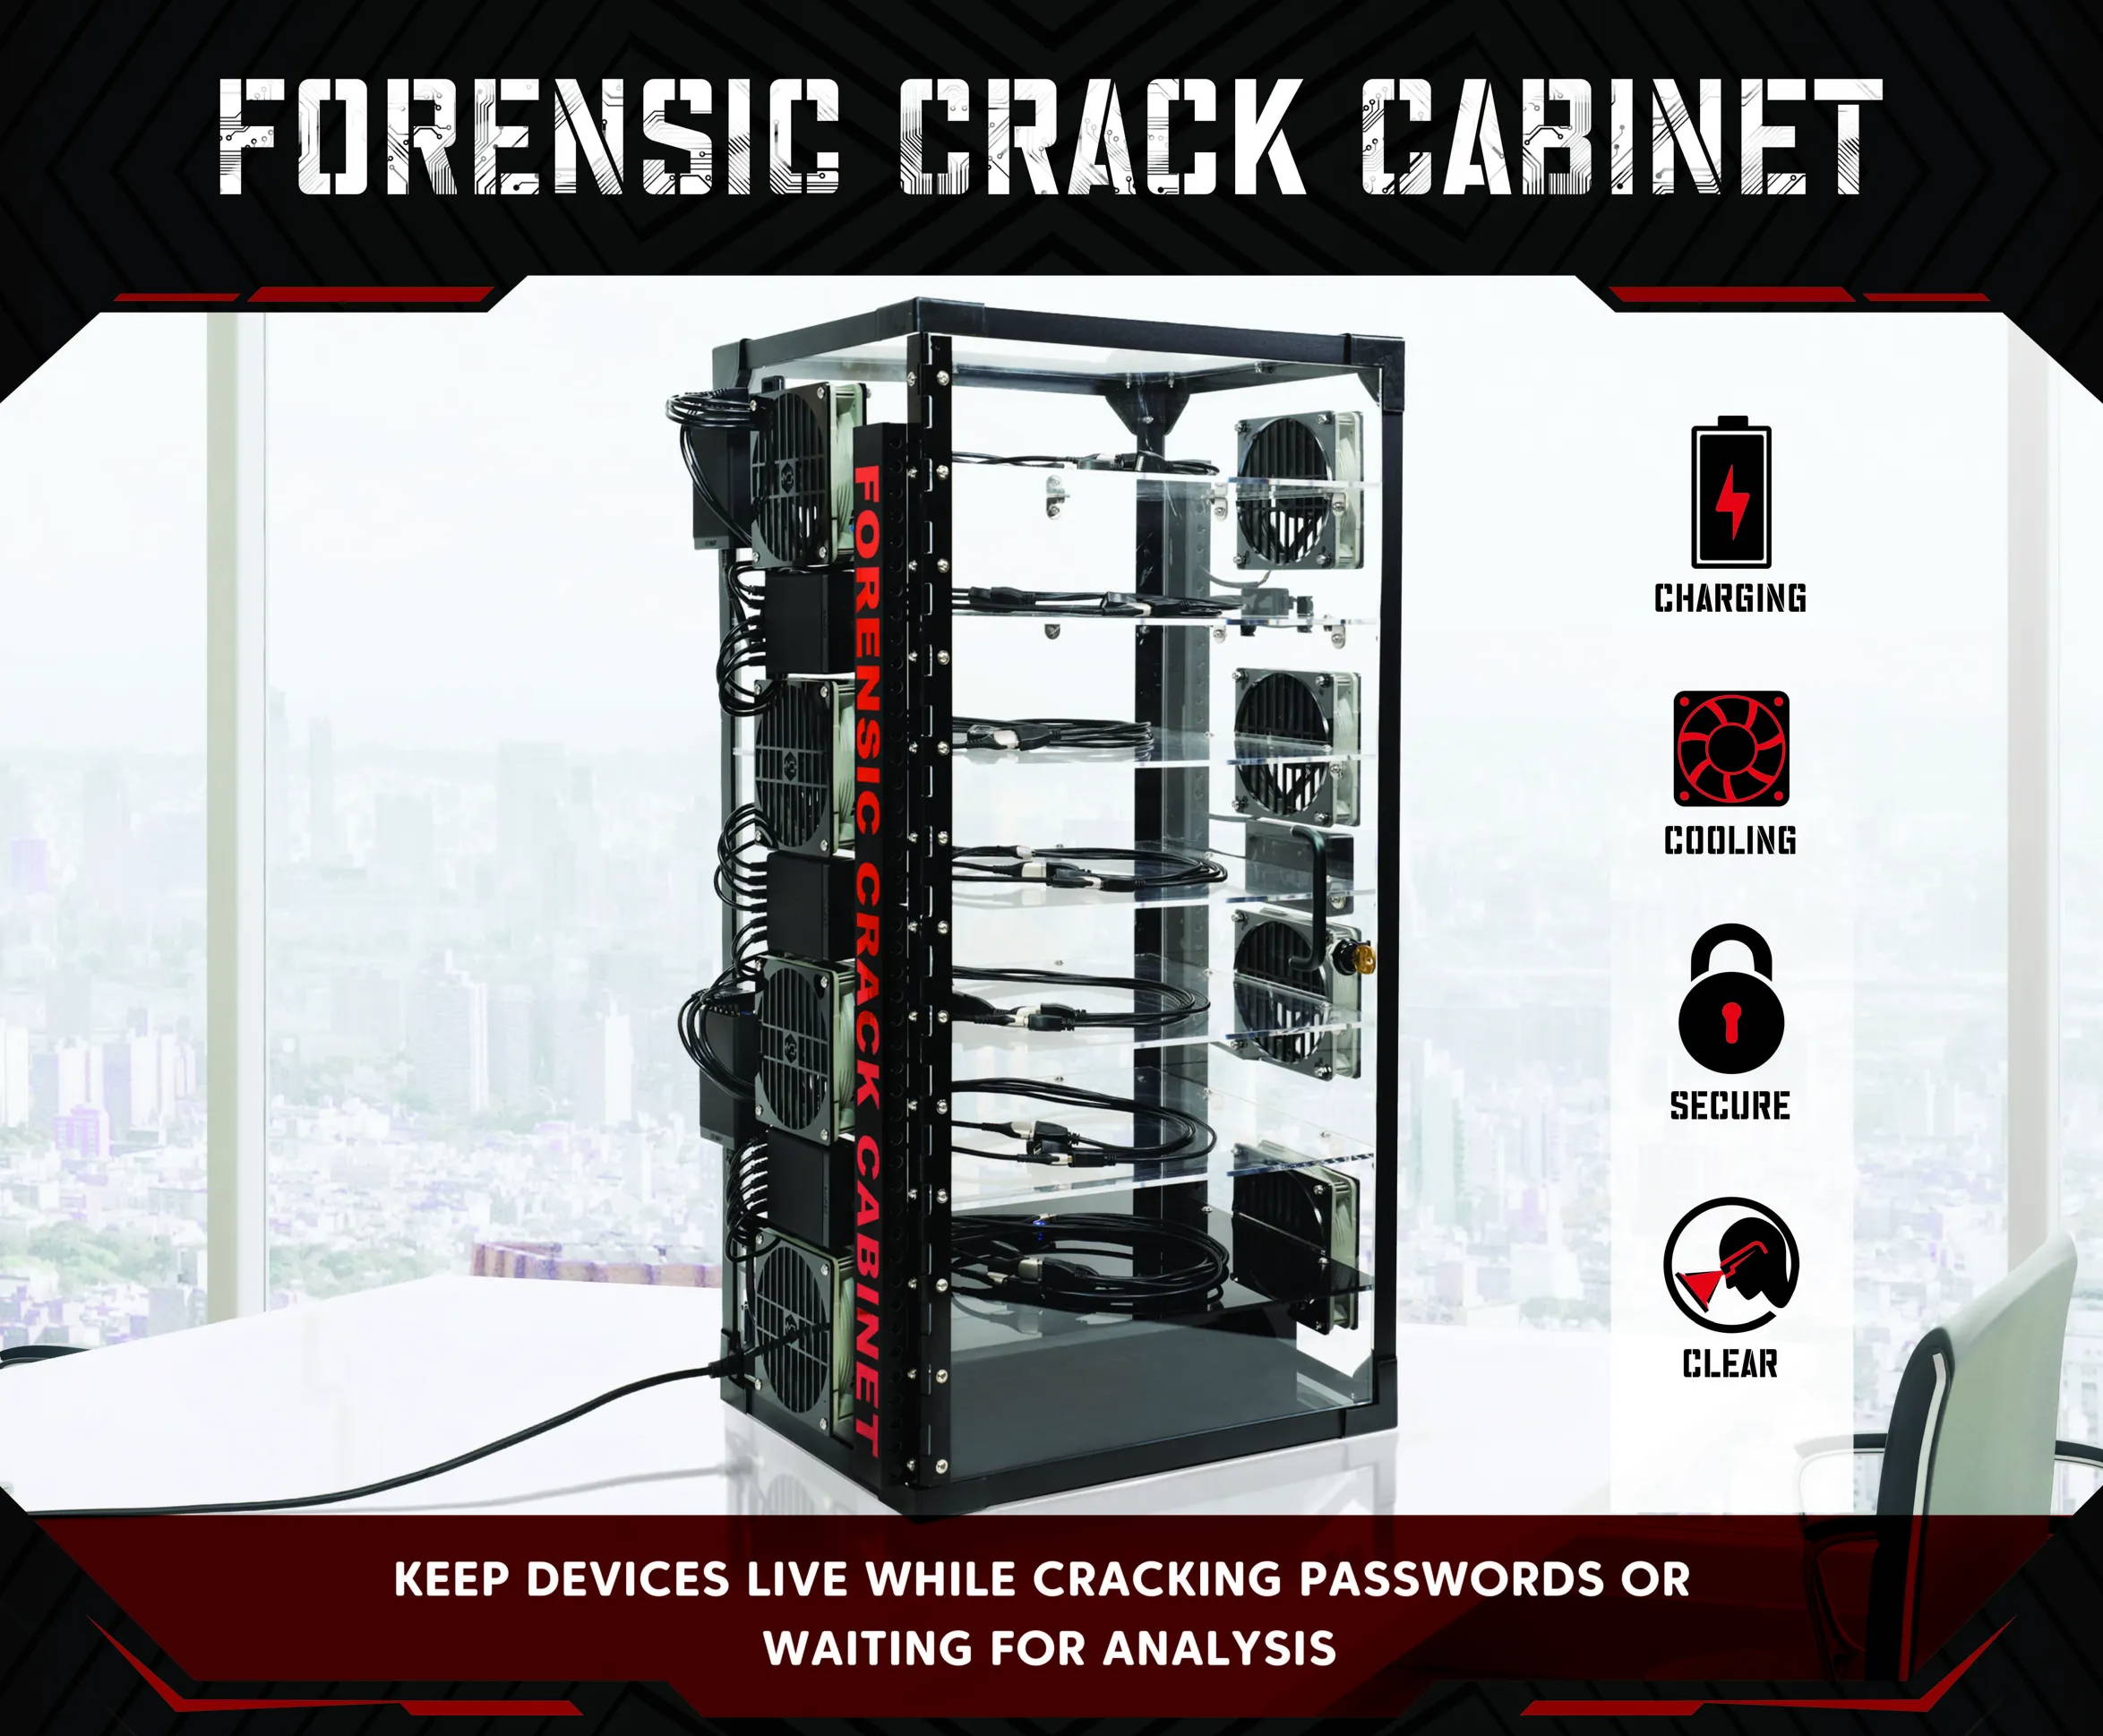 Mission Darkness Forensic Crack Cabinet charges cools and secures mobile devices